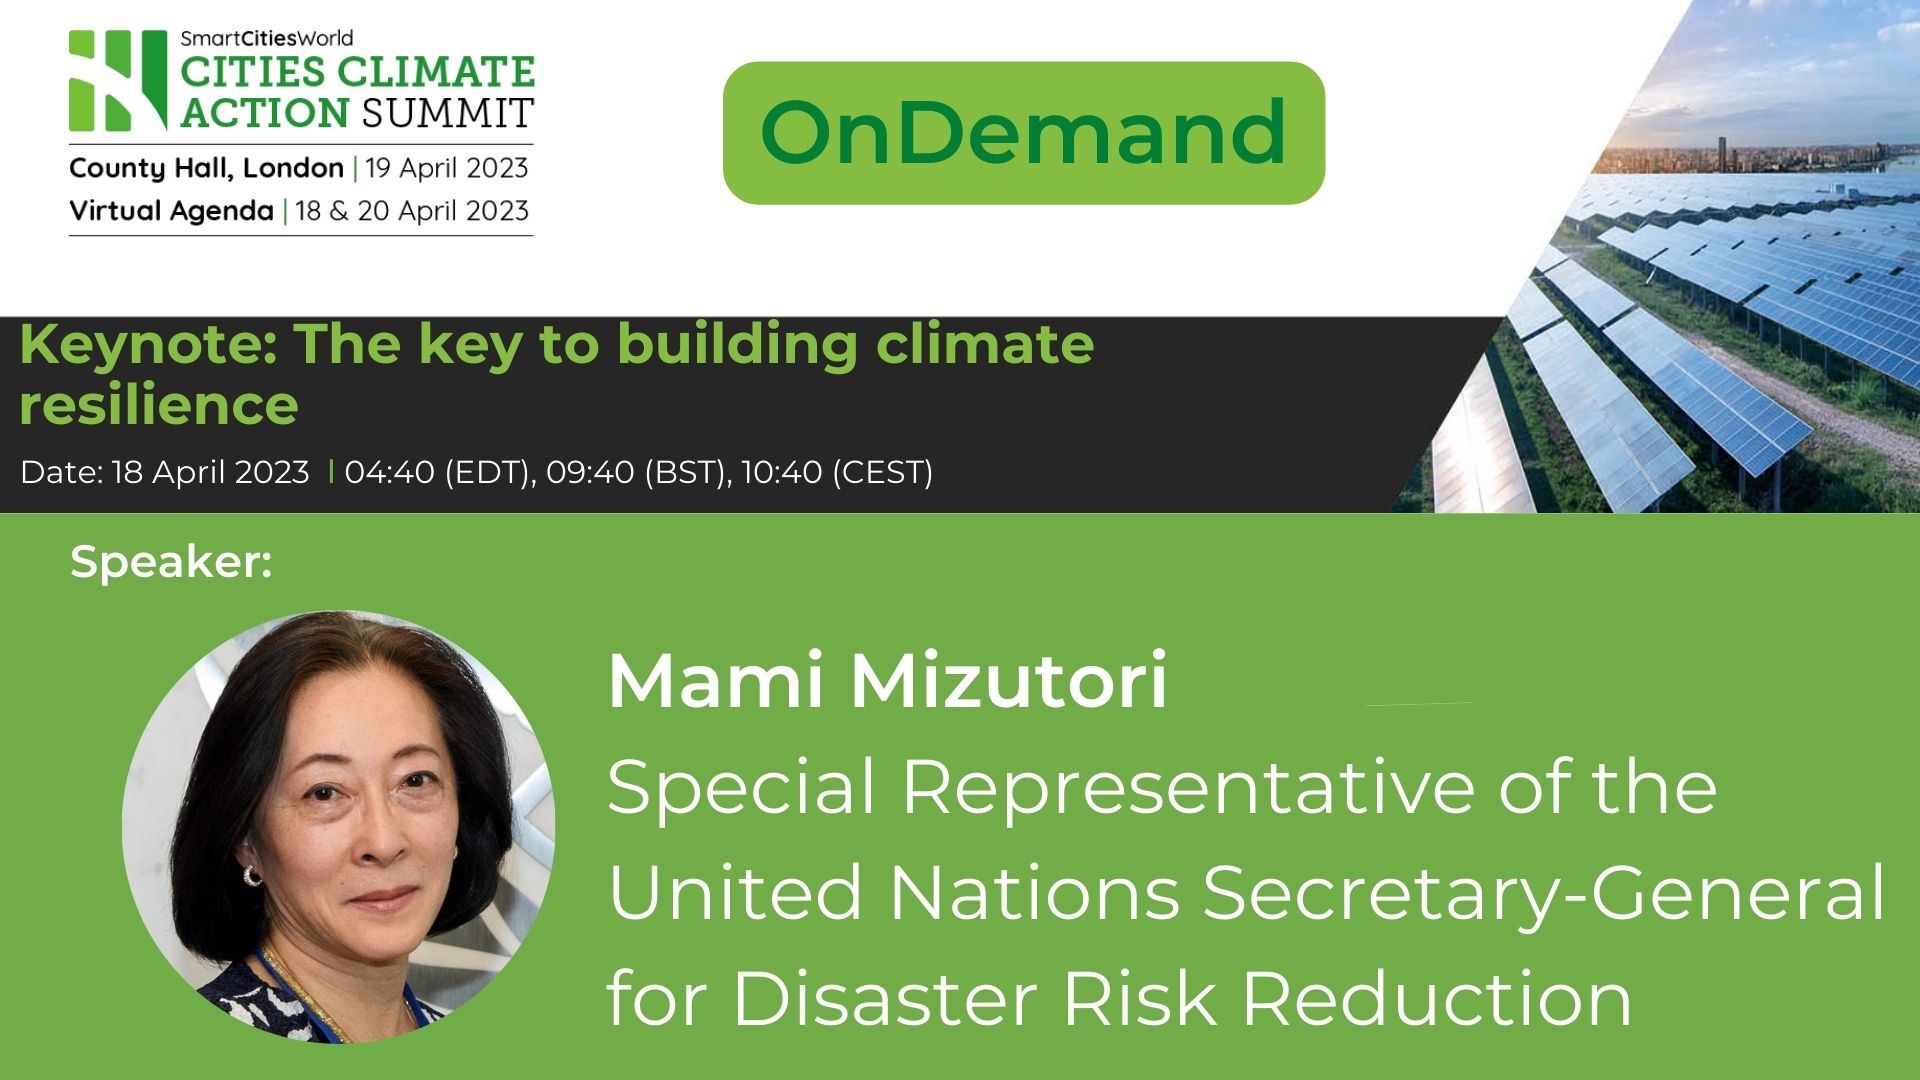 OnDemand Keynote: Mami Mizutori, Assistant Secretary General, United Nations Office of Disaster Risk Reduction